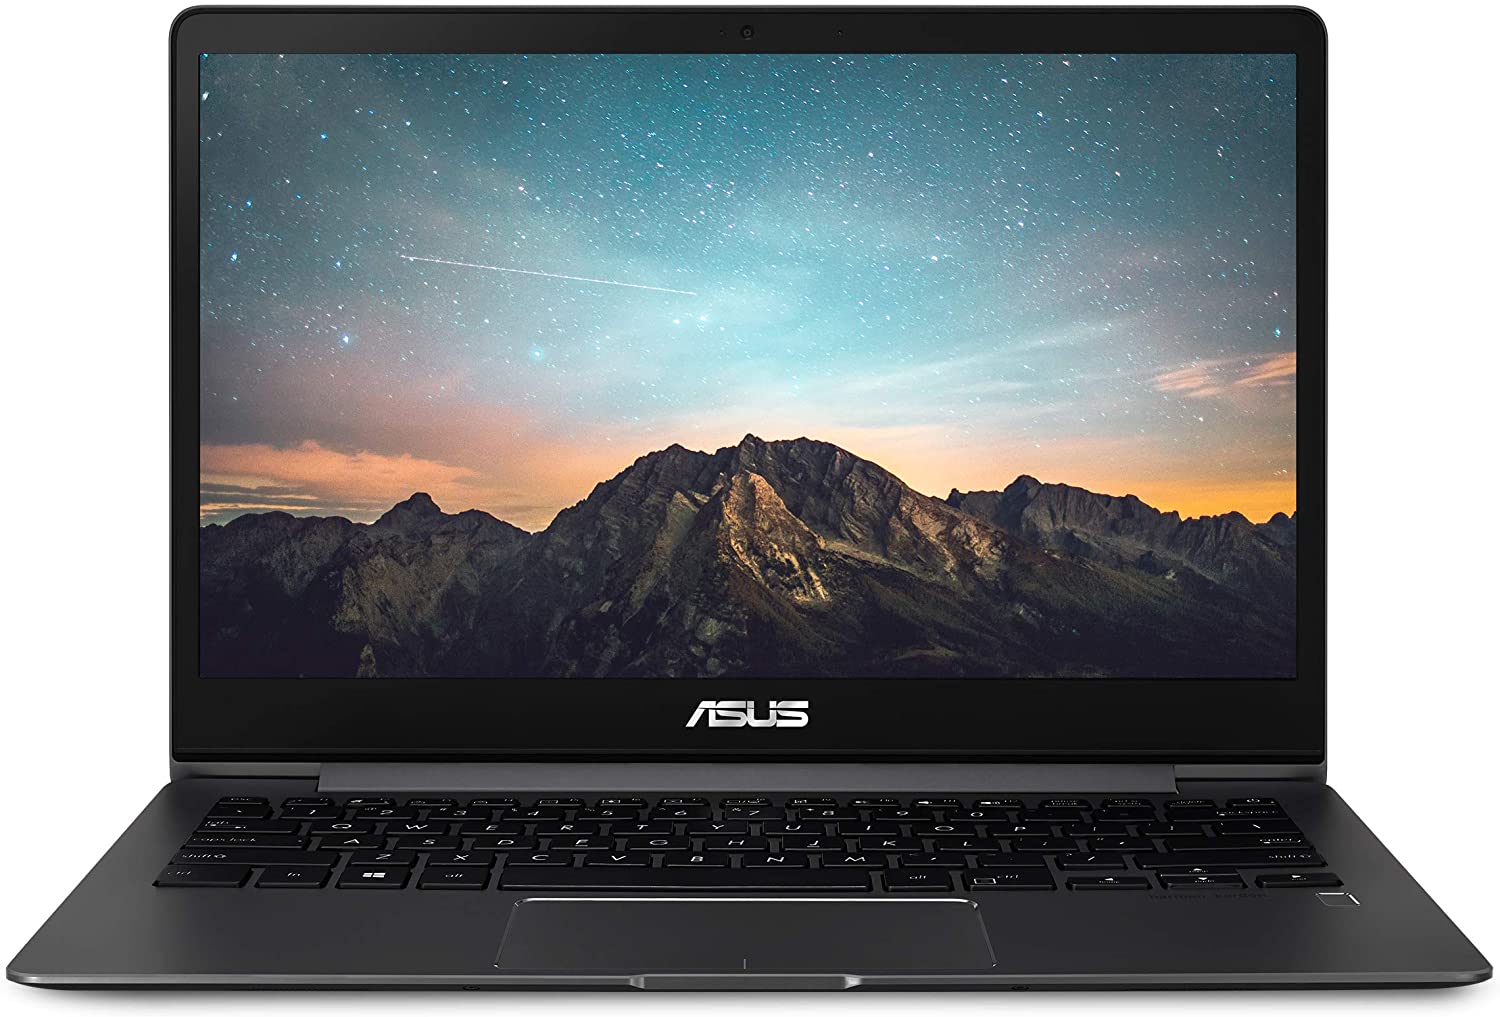 <strong>ASUS ZenBook 13 UX331FA-AS51</strong>